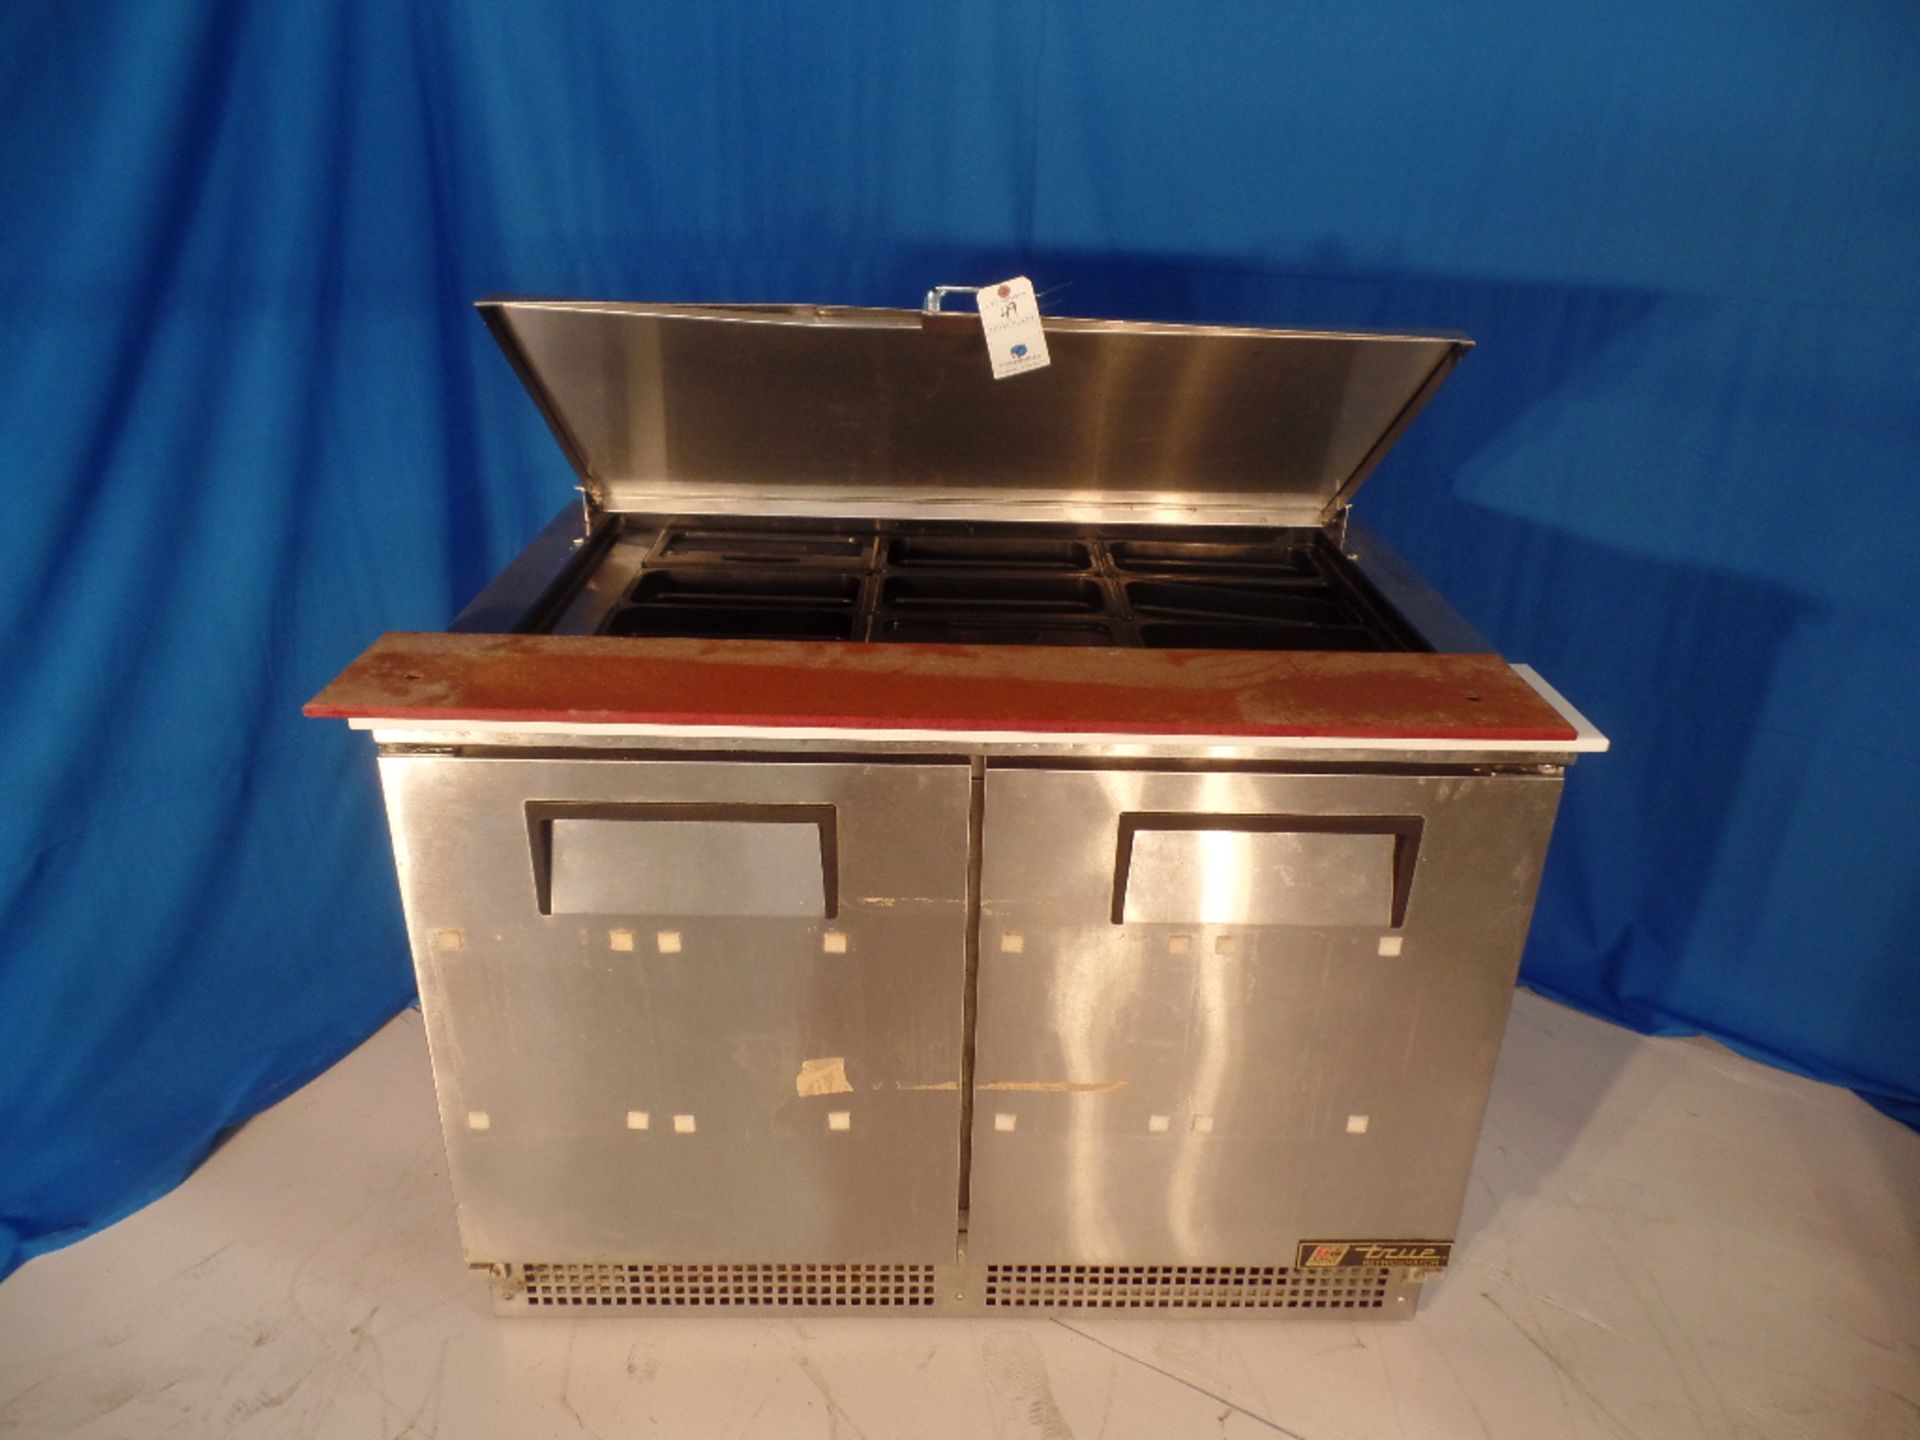 LATE MODEL RESTAURANT EQUIPMENT AUCTION PREVIEW LOT - DO NOT BID ON LOT. - Image 7 of 14